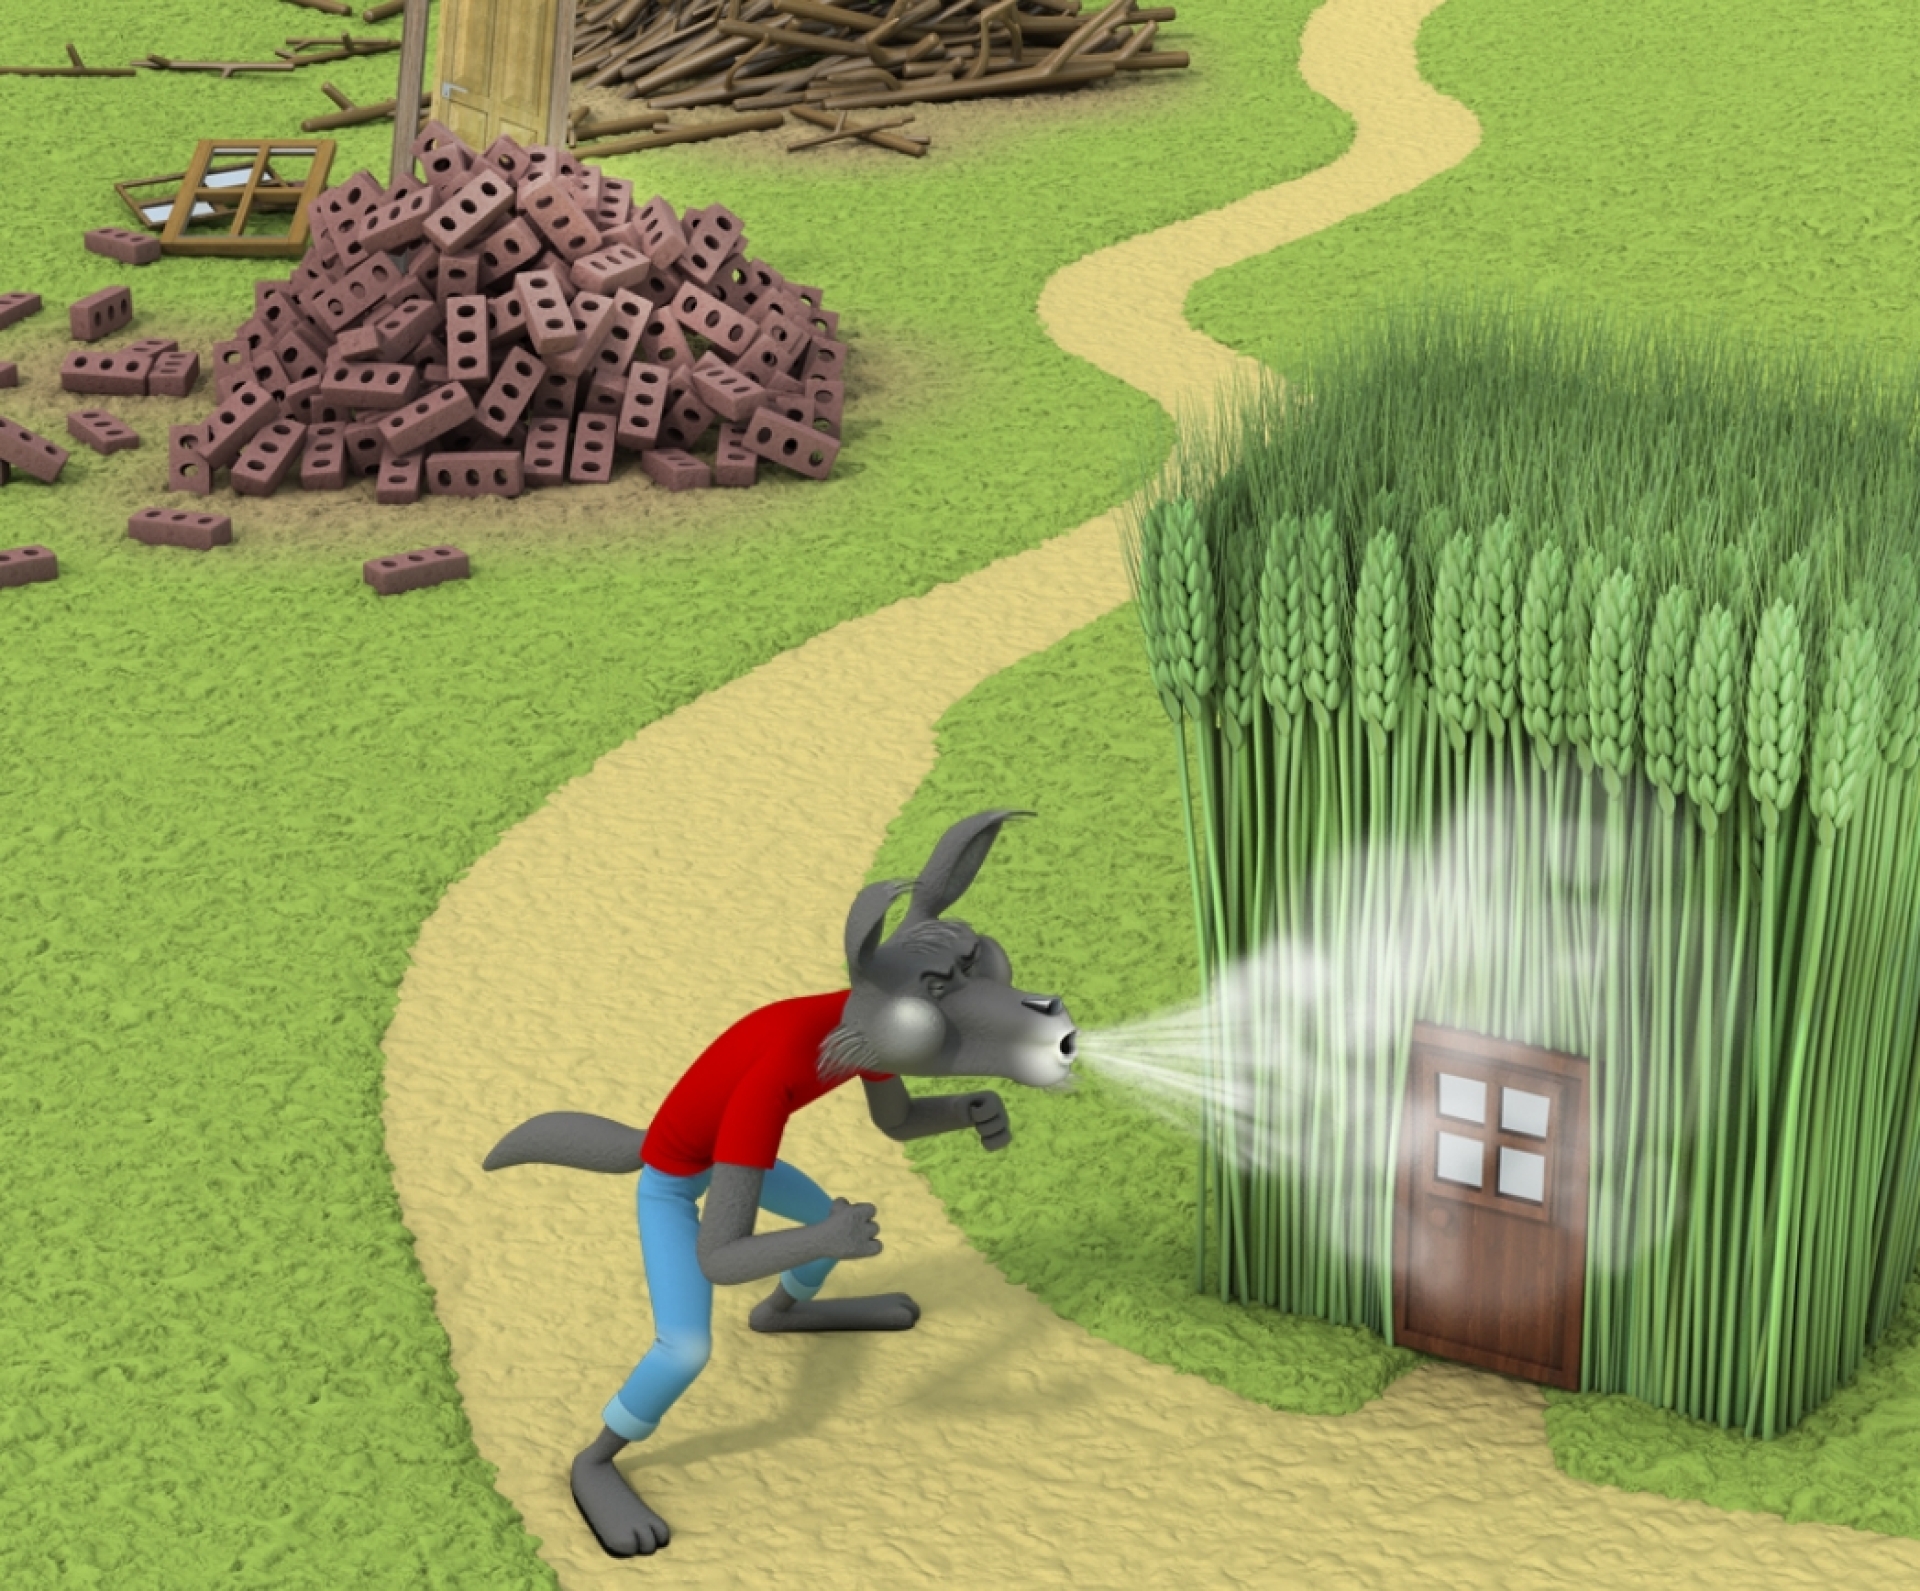 Illustration of the big bad wolf trying to blow down a house made of stalks and failiing